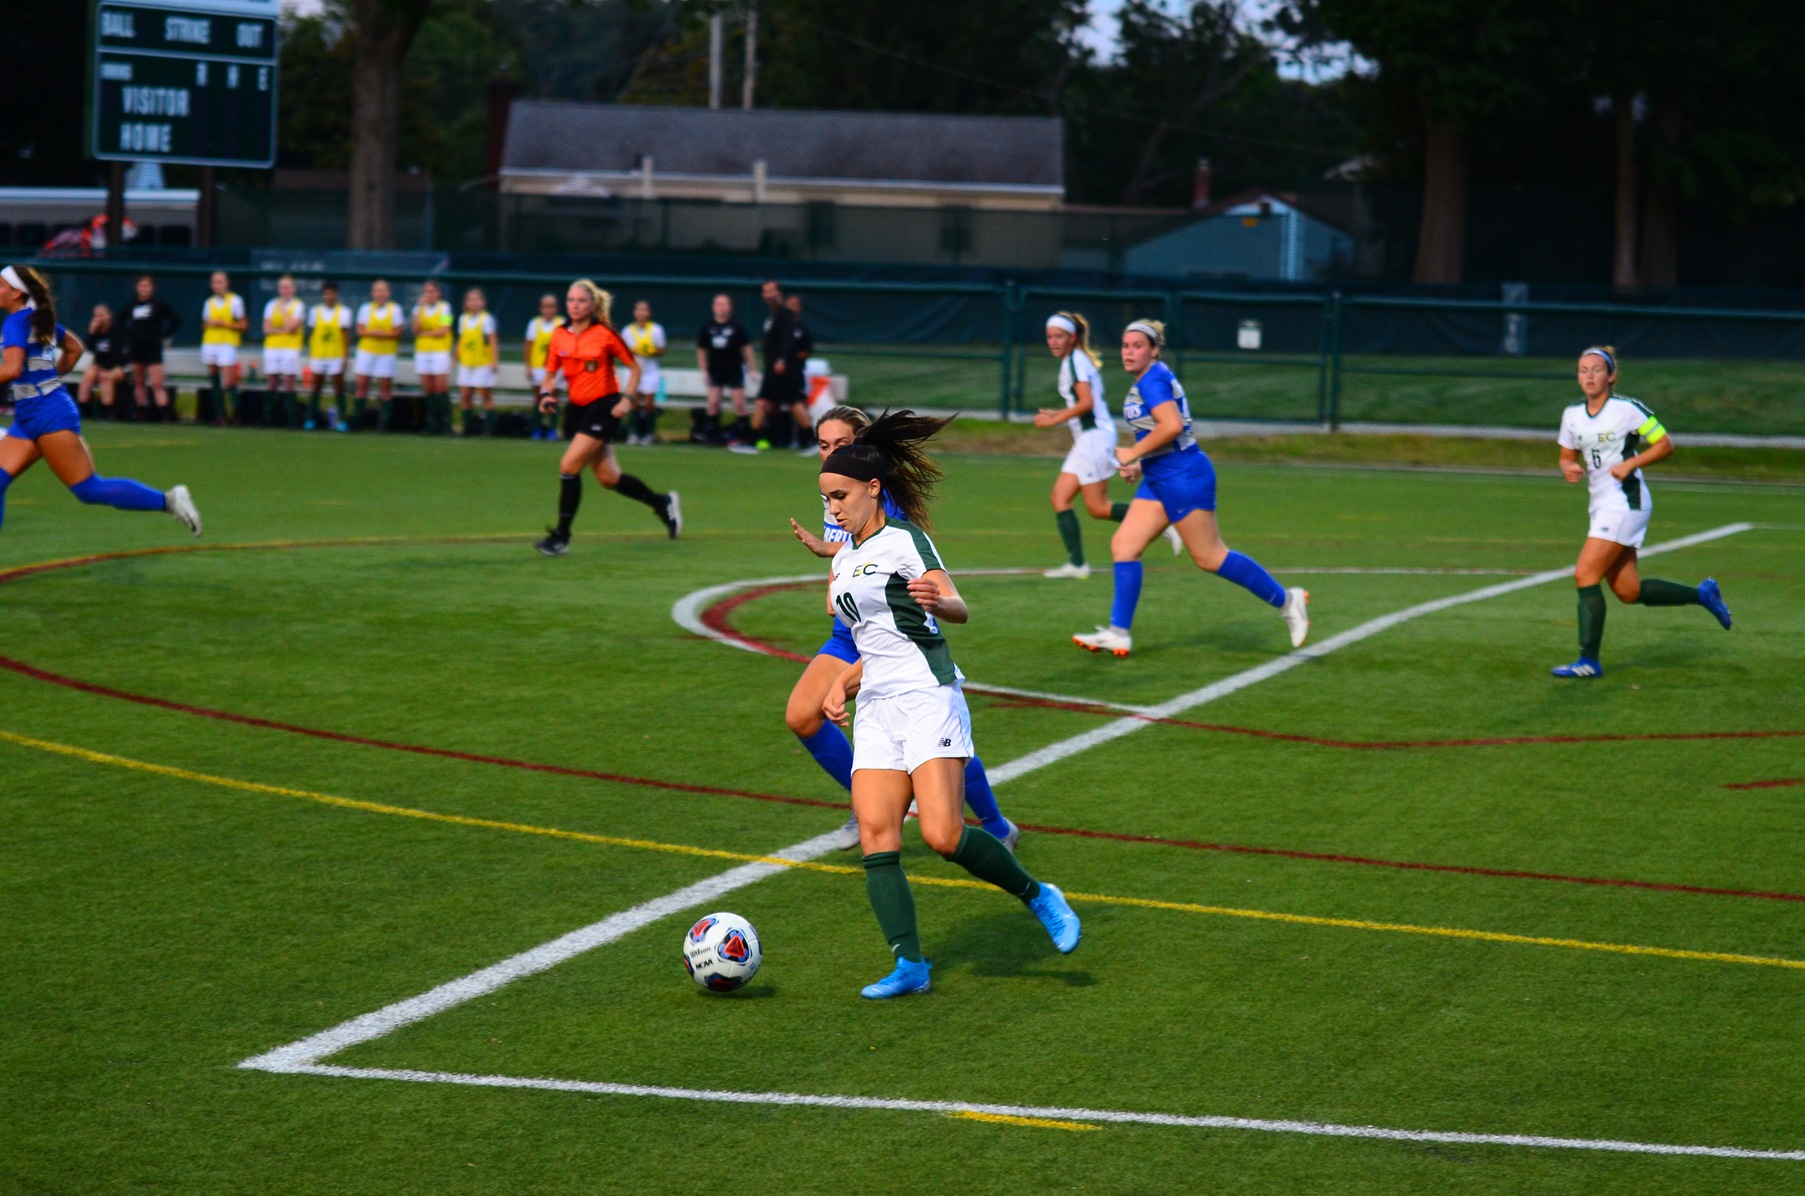 Blazers And Golden Bears Play To 0-0 Draw